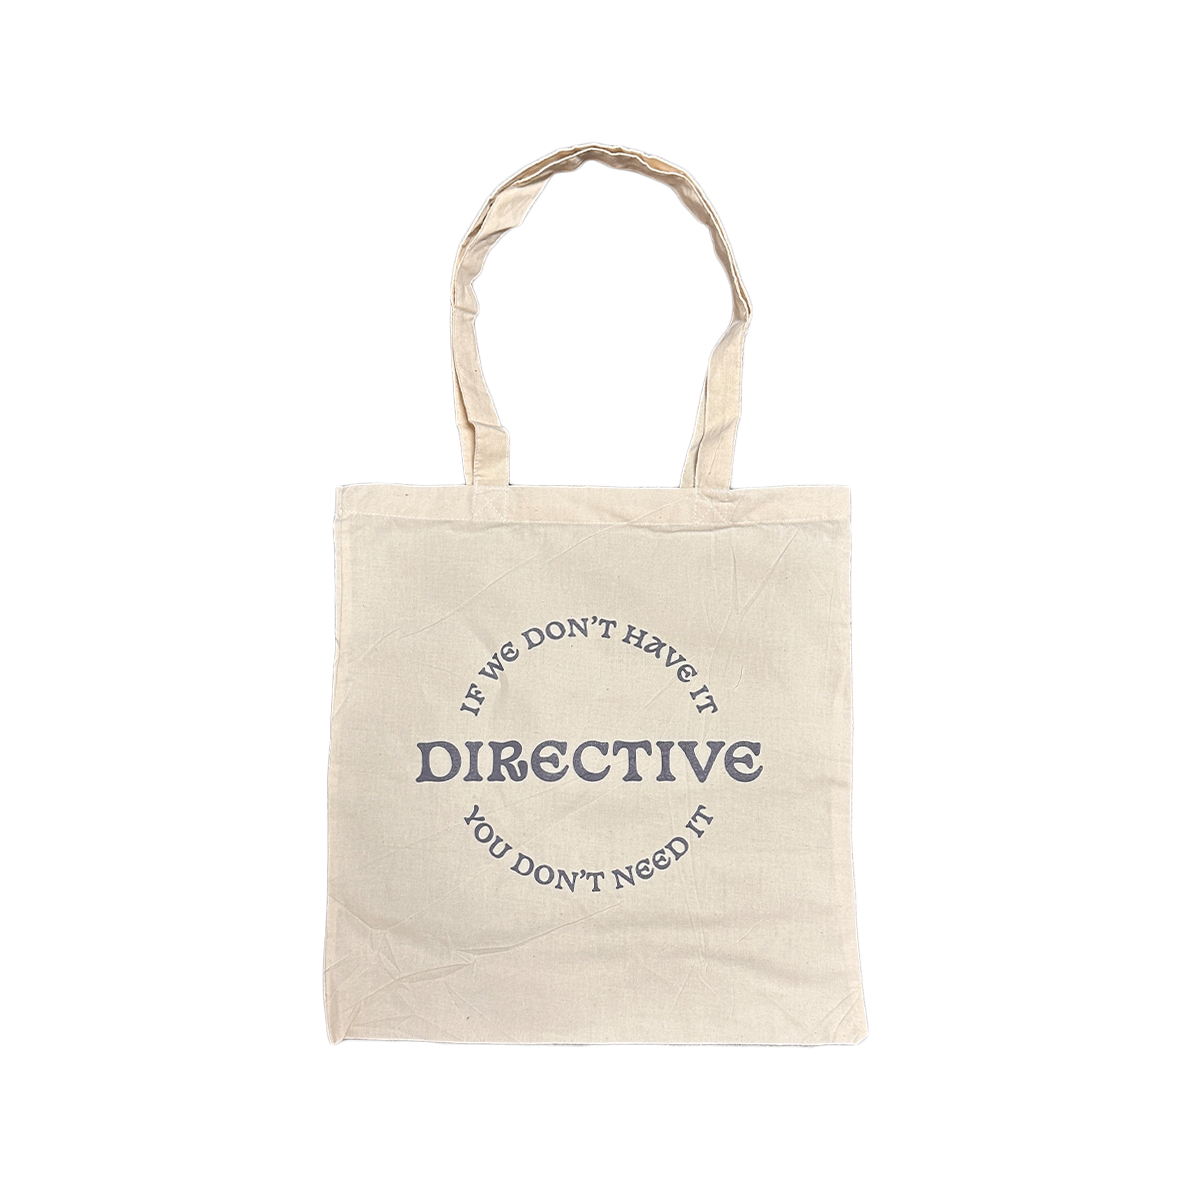 Directive Don't Need It Tote Bag - Natural